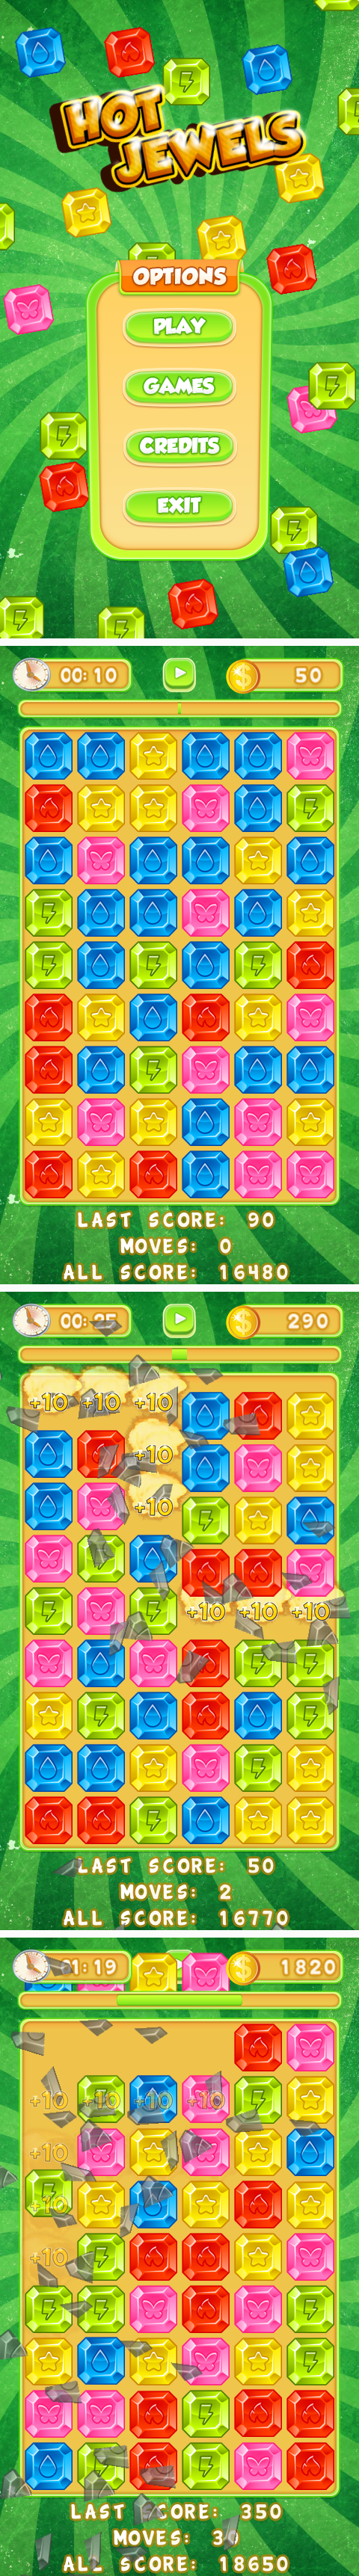 Hot Jewels - HTML5 Mobile Game (Construct 3 | Construct 2 | Capx) - 1